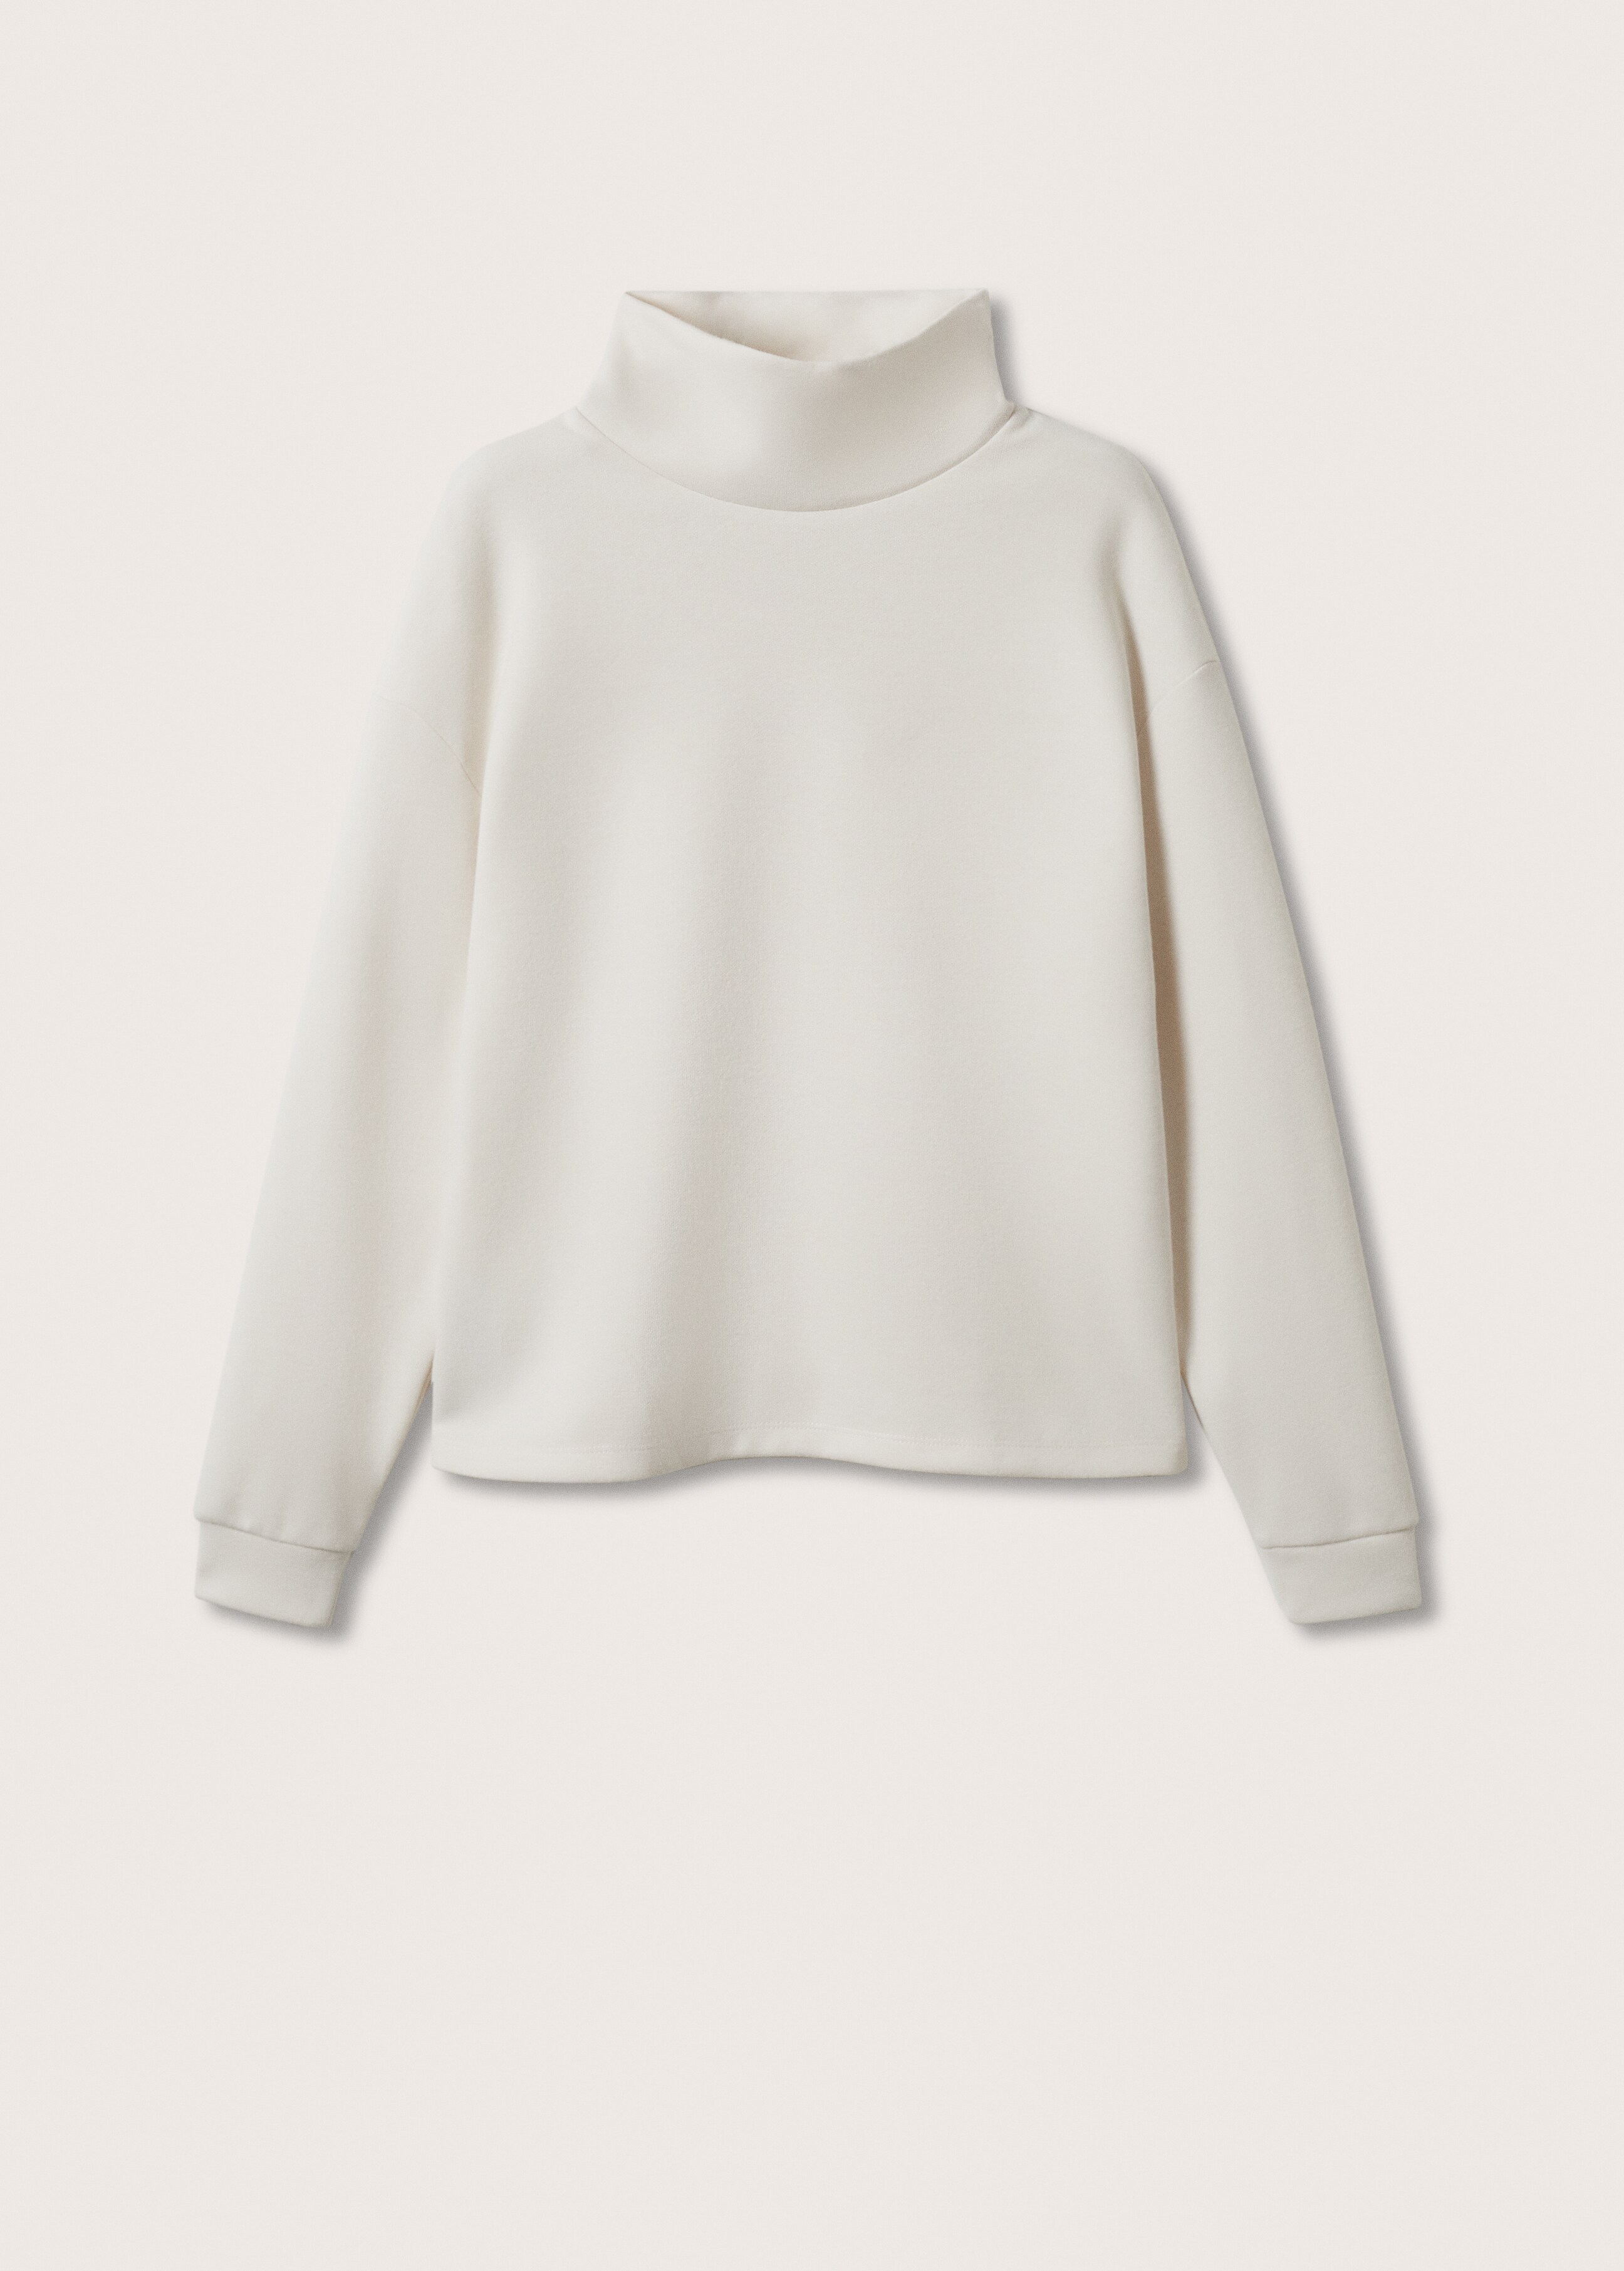 Funnel neck sweatshirt - Article without model